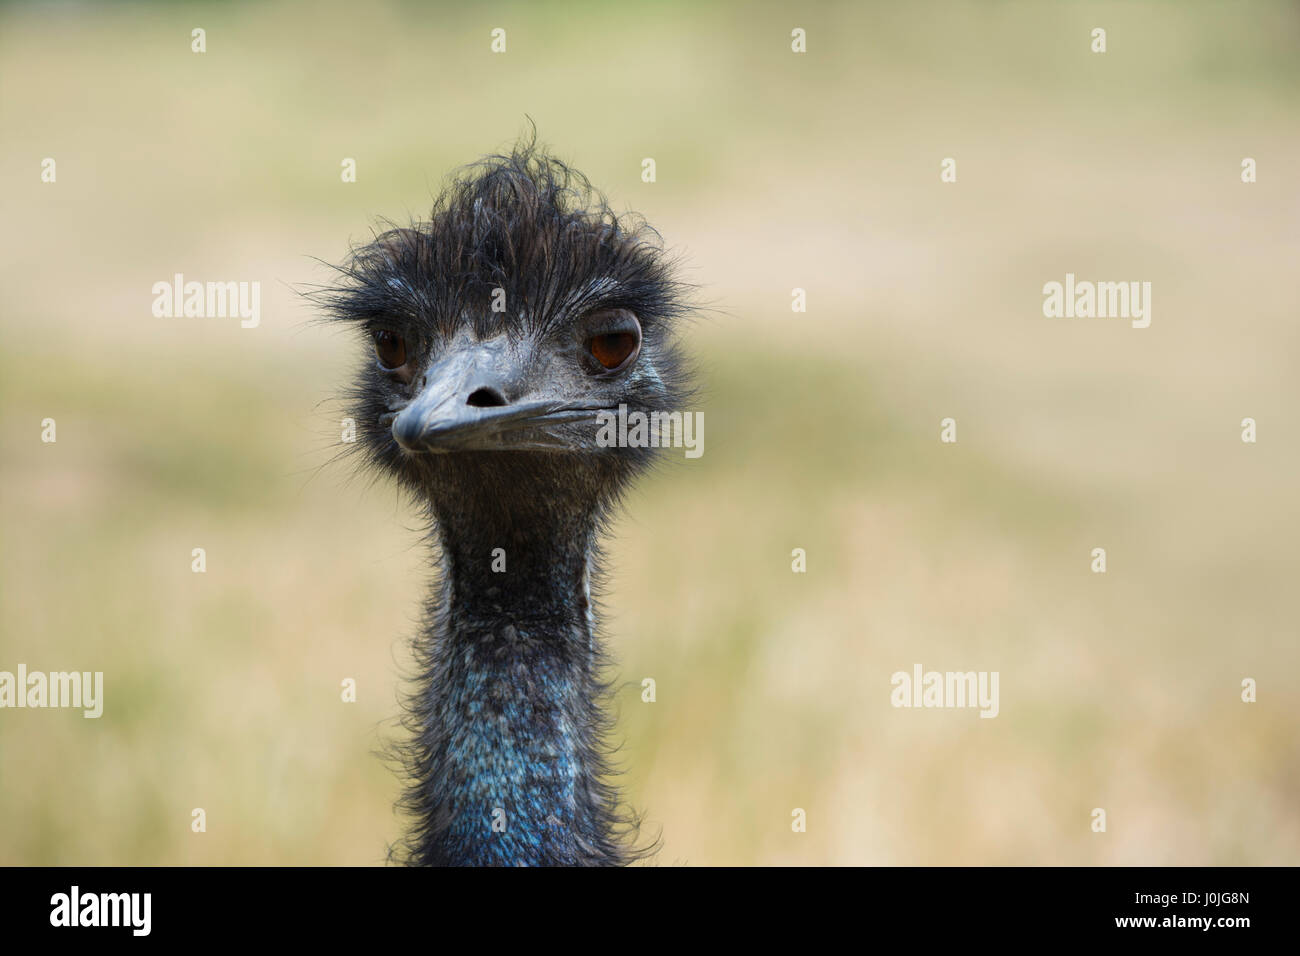 Head and neck shot of an Emu (Dromaius Novaehollandiae)  facing forward.  Shallow depth used leaving the natural background soft and blurred. Stock Photo